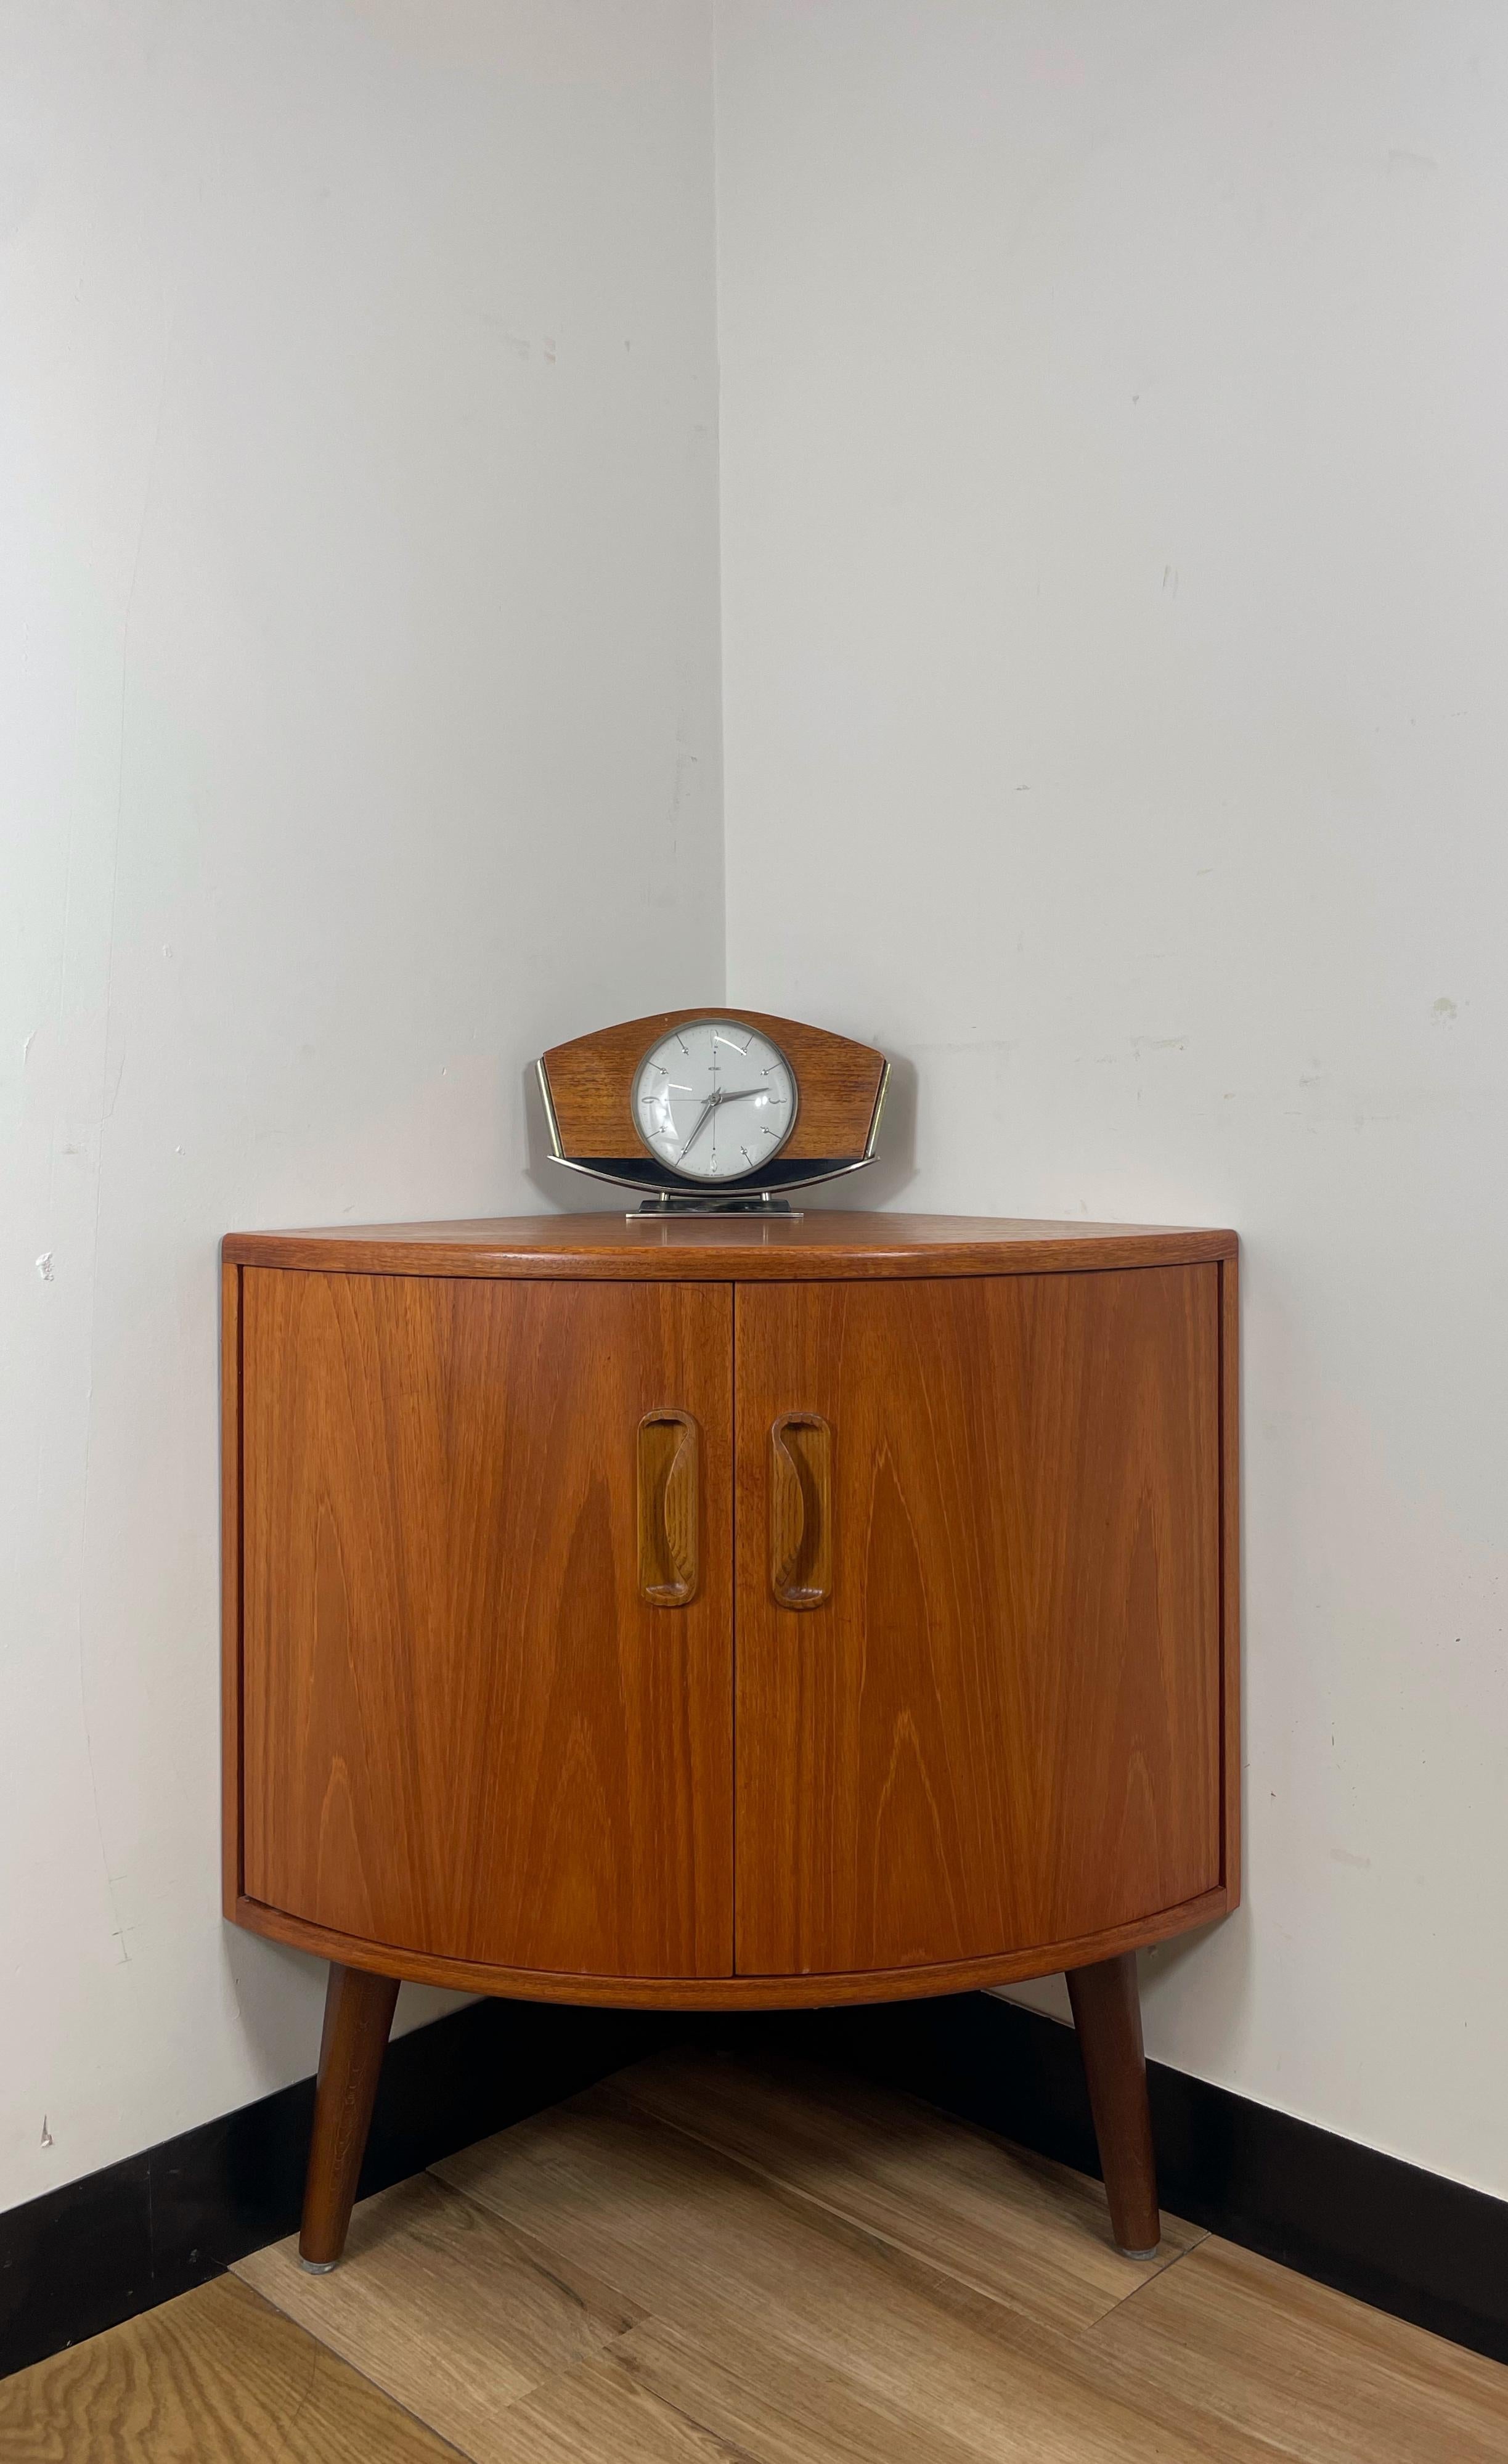 Beautiful G Plan Fresco mid-century teak corner cabinet. Very stylish design standing on three tapered legs.

Condition: 
This unit is in excellent vintage condition with very minor signs of use. The cabinet has been cleaned, oiled and wax polished